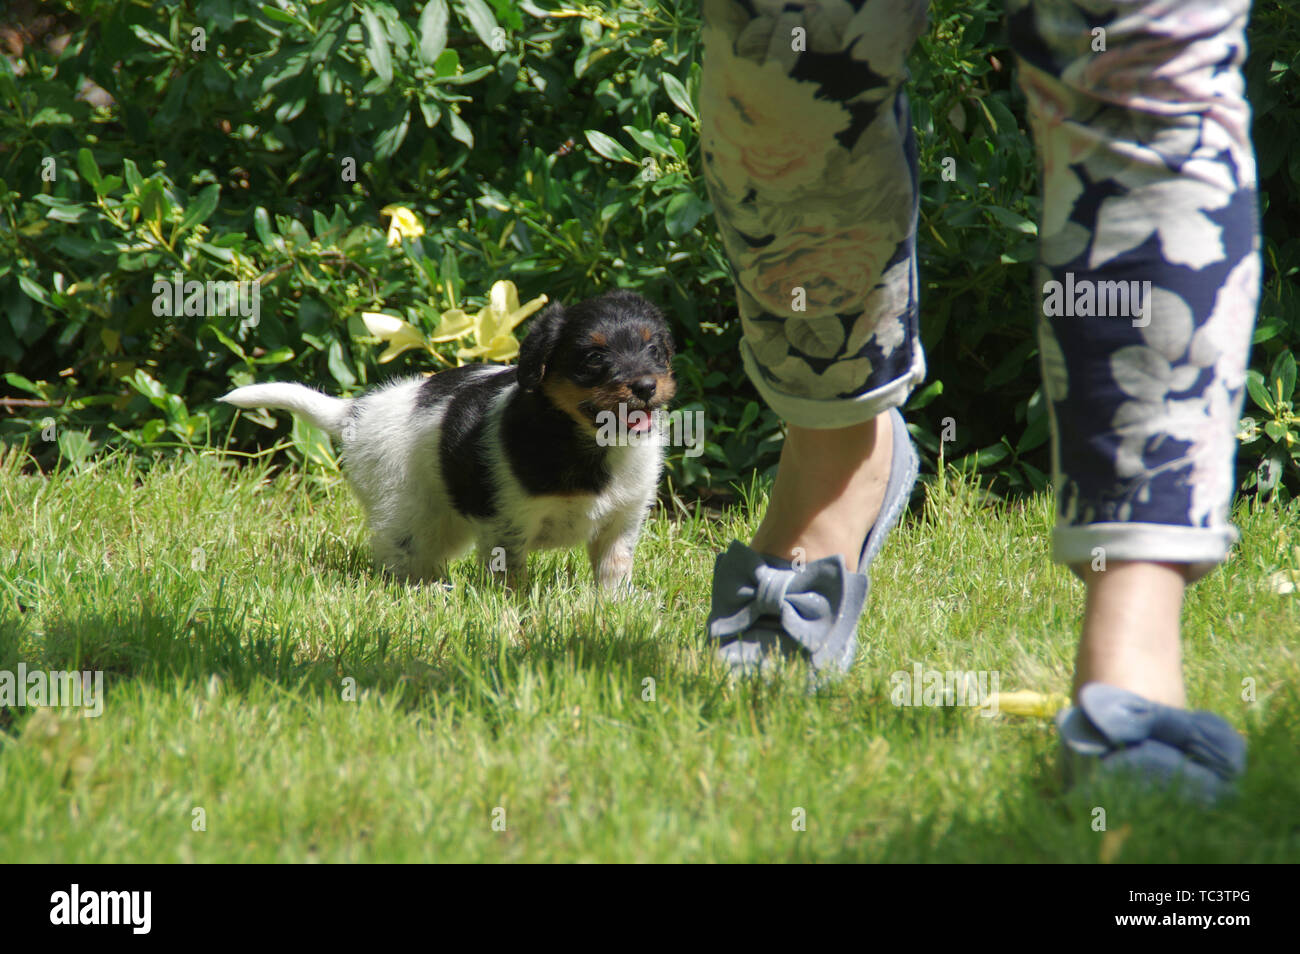 The puppy walks on the grass and chases a woman. A small dog meets the world with curiosity. Stock Photo